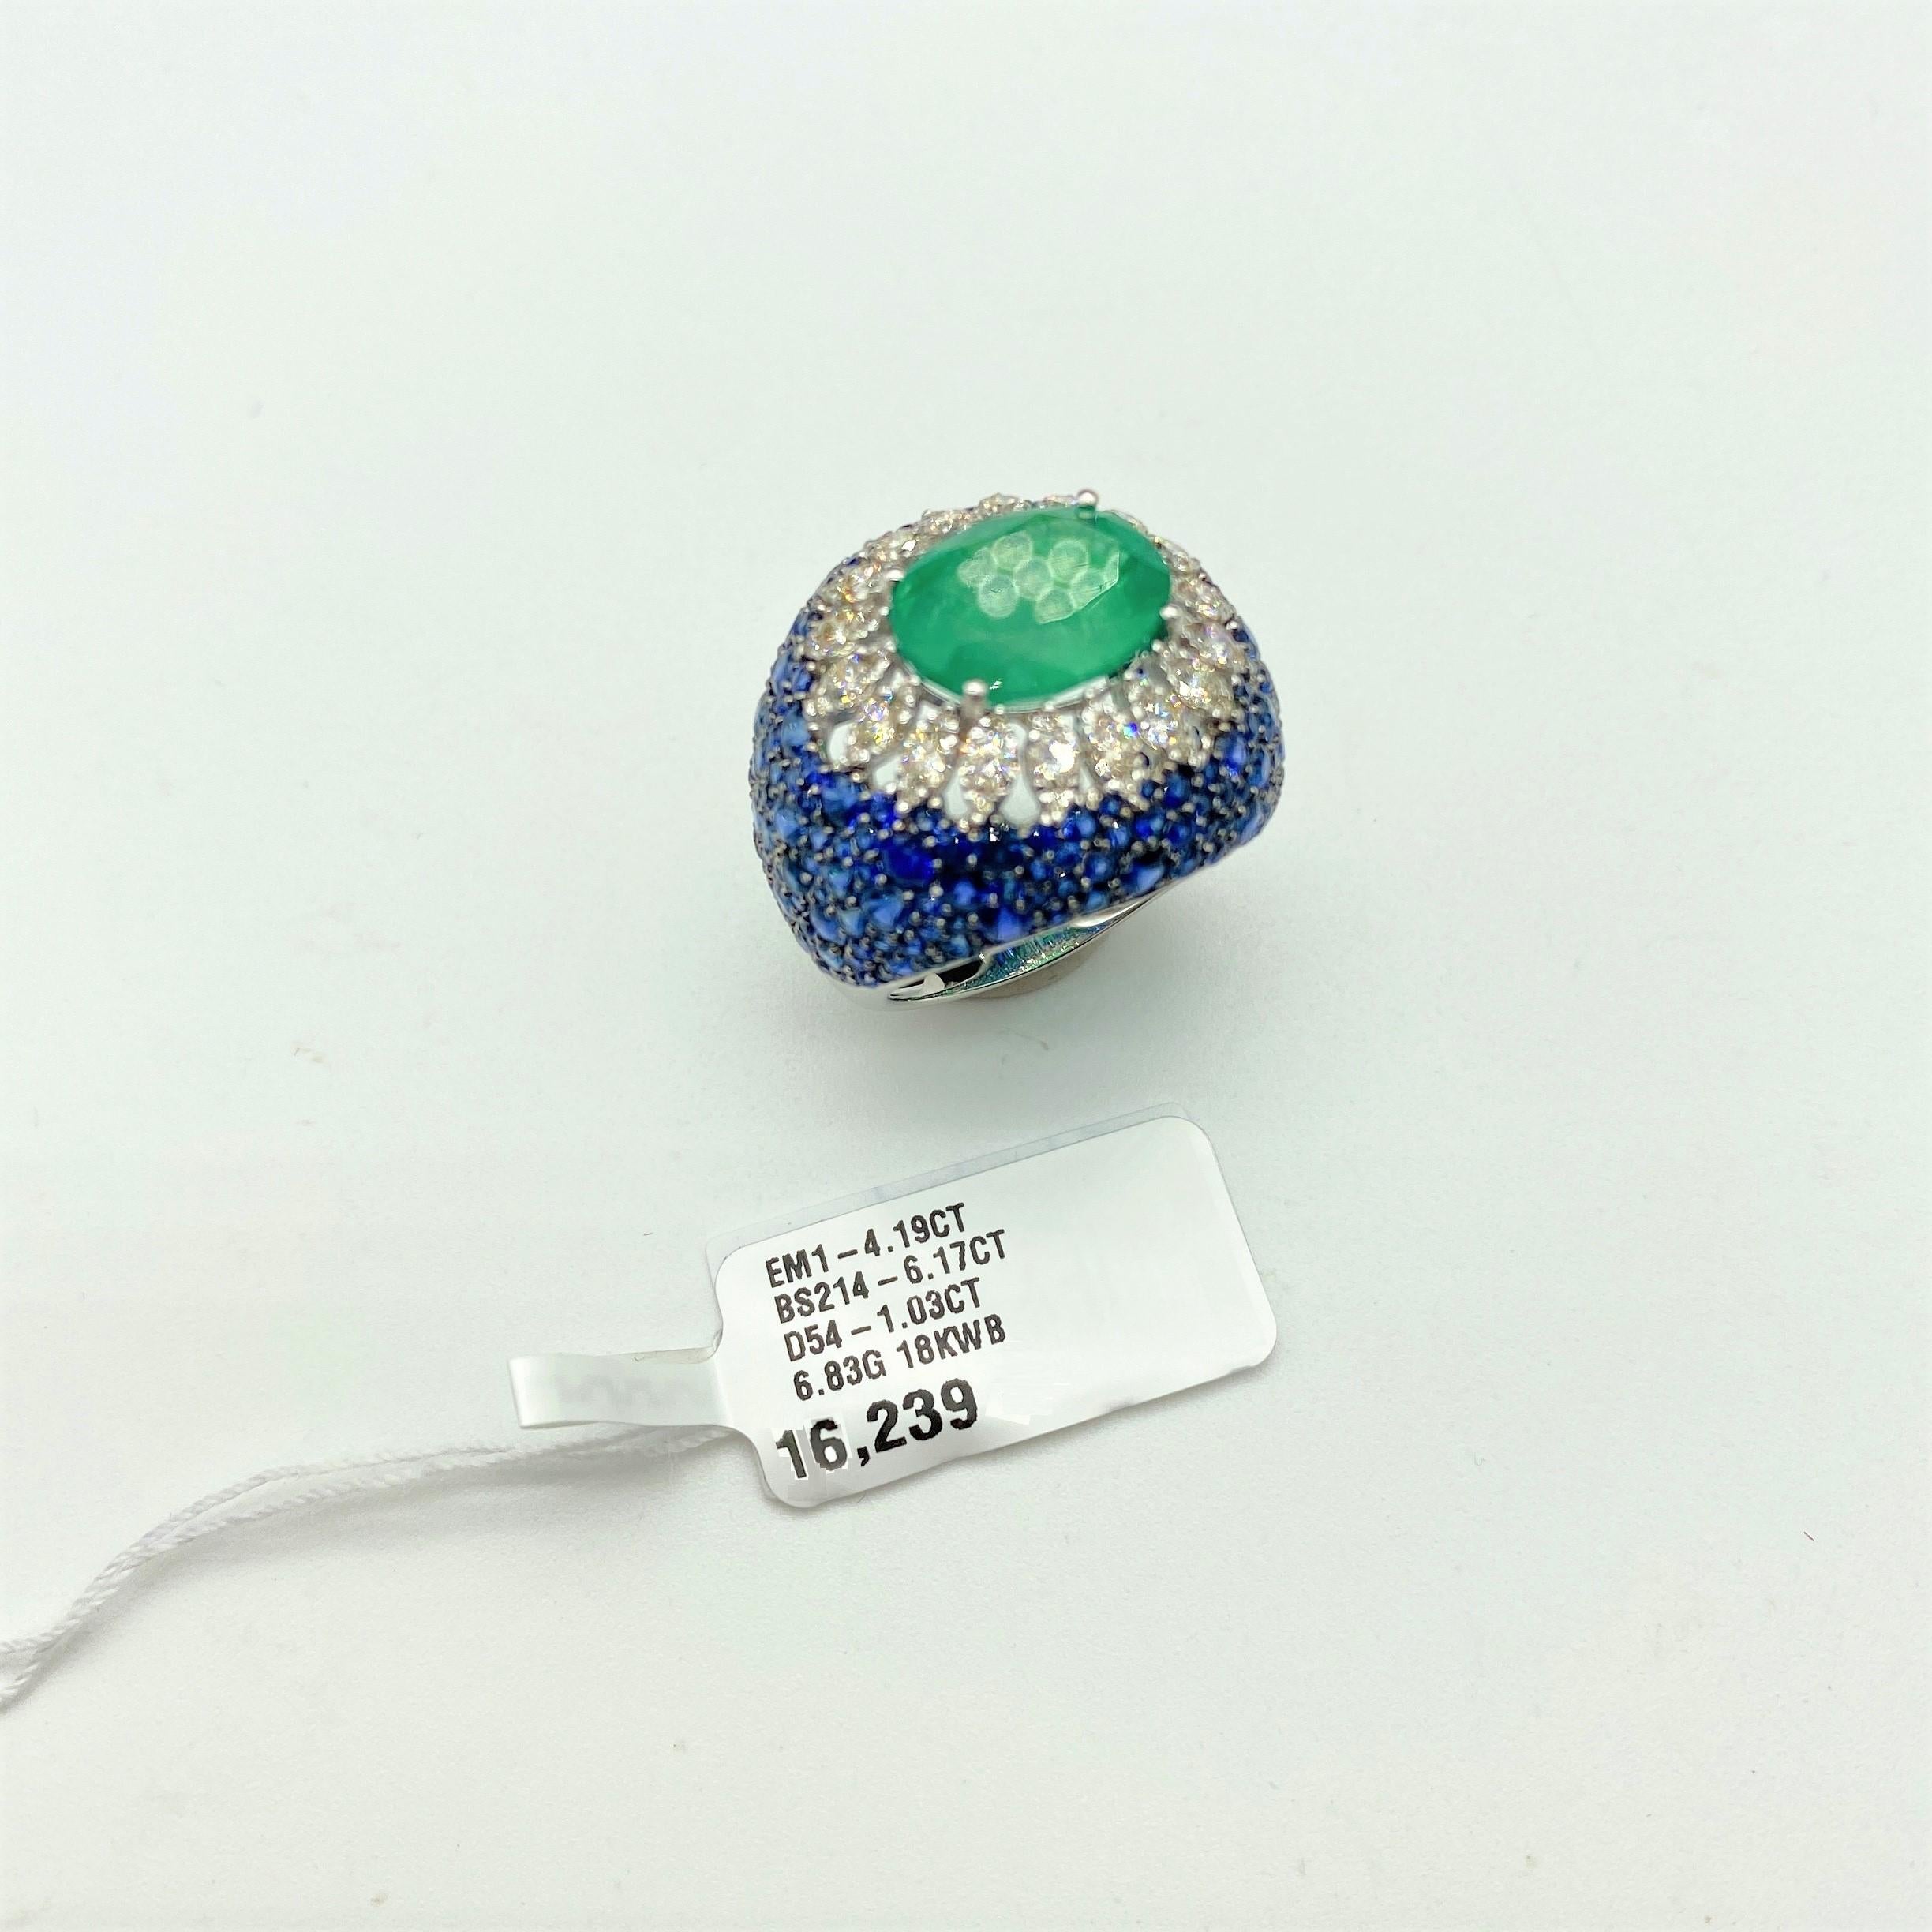 Mixed Cut NWT $16, 239 18KT Gold Gorgeous 11.50CT Emerald Blue Sapphire and Diamond Ring For Sale